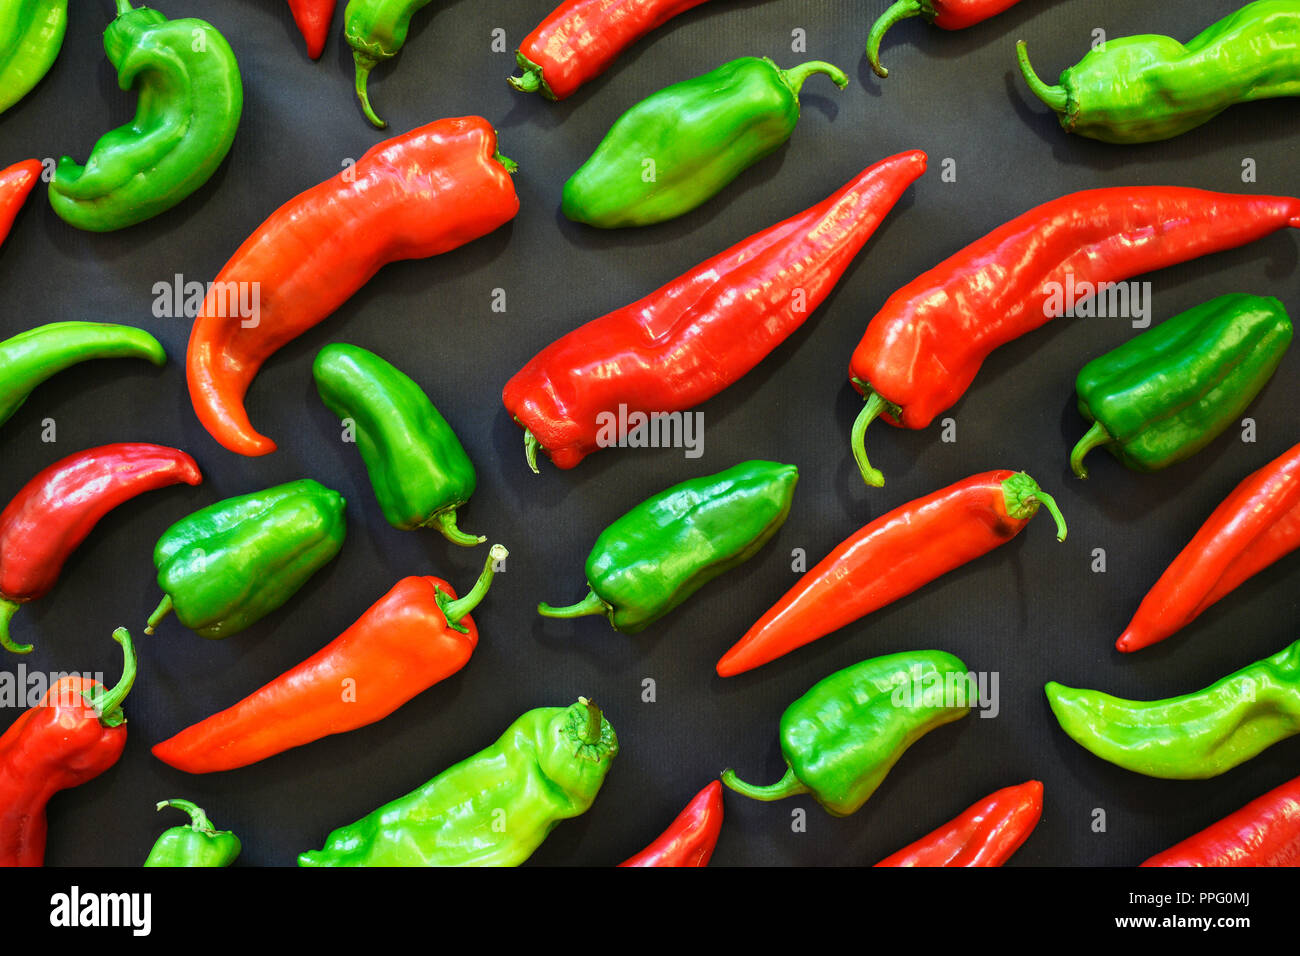 Red and green peppers shapes pattern on a dark background. Vegetables and food abstract background. Top view. Organic food and shapes. Stock Photo